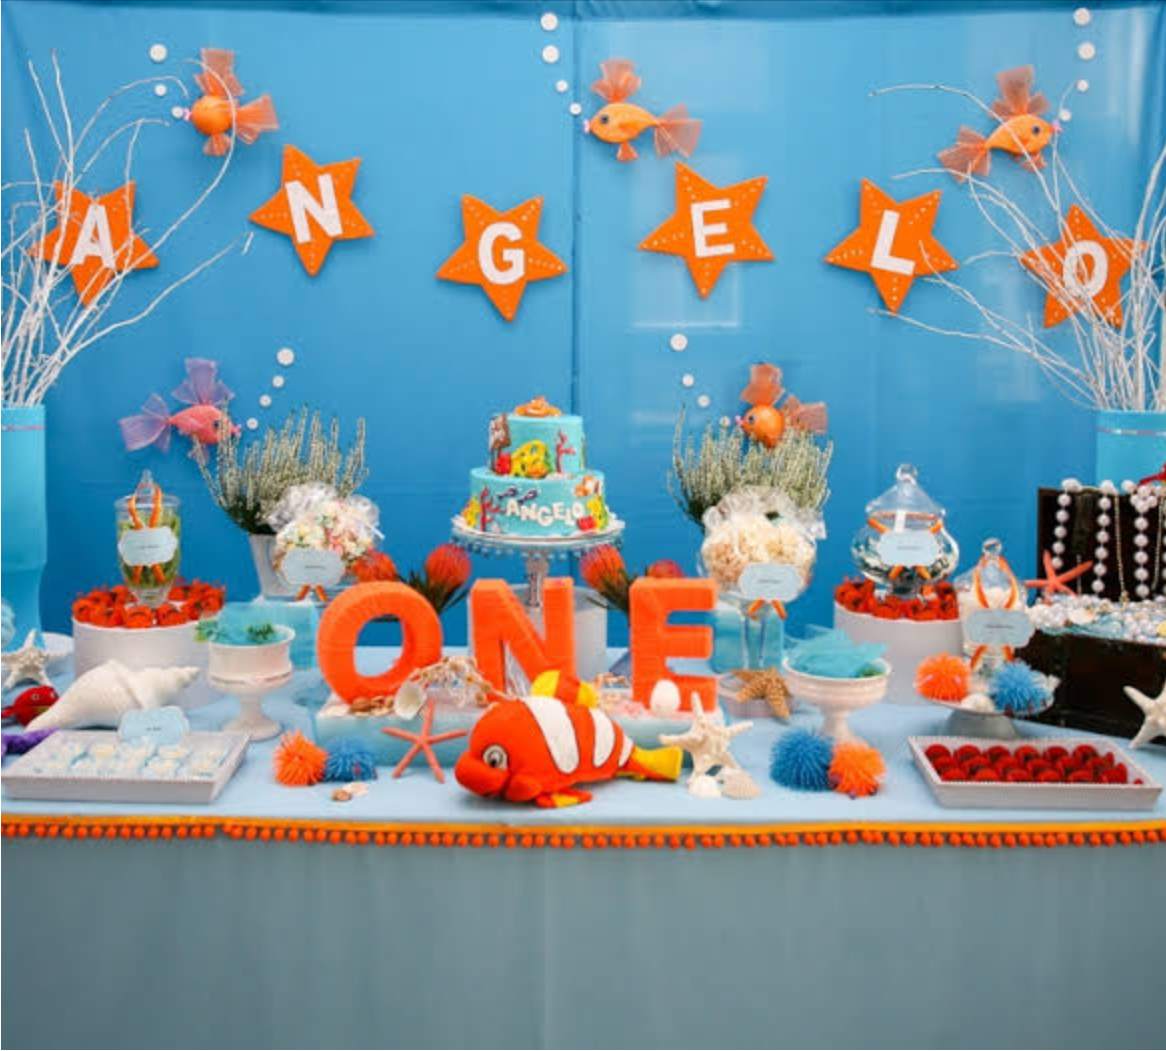 Finding Nemo Birthday Party Ideas: Food, Decor & More! - The